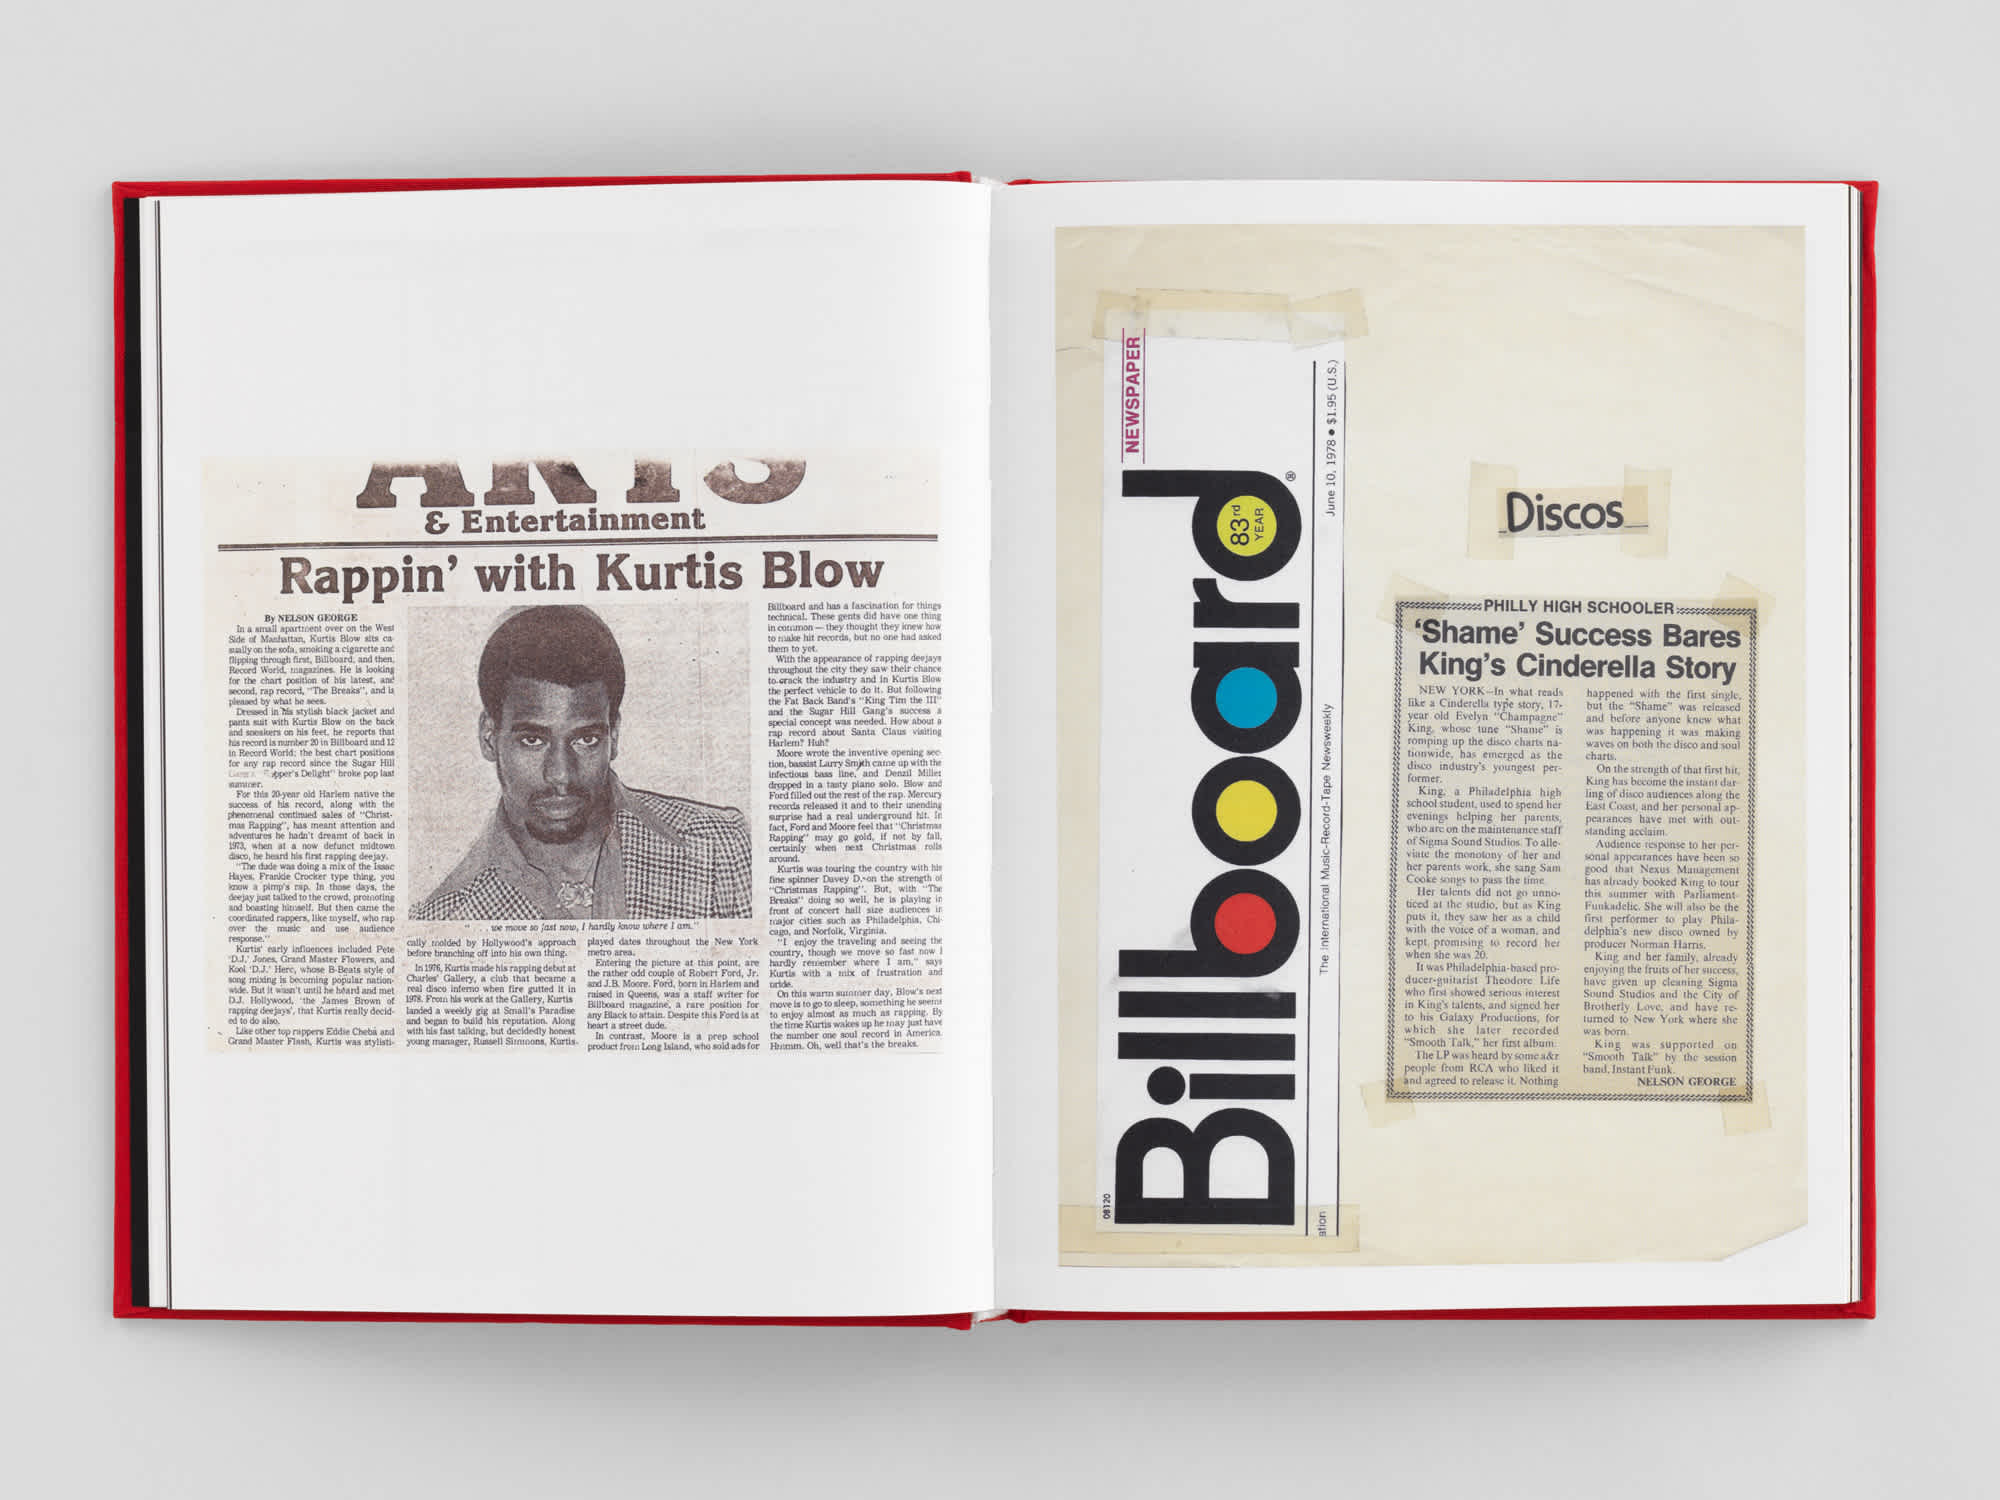 Open book. Each page has old newspaper clippings on it. The left page has a cutout from the arts and culture section with a picture of the rapper Kurtis Blow in the center, surrounded by text. The right page has a collage of newspaper clippings. 